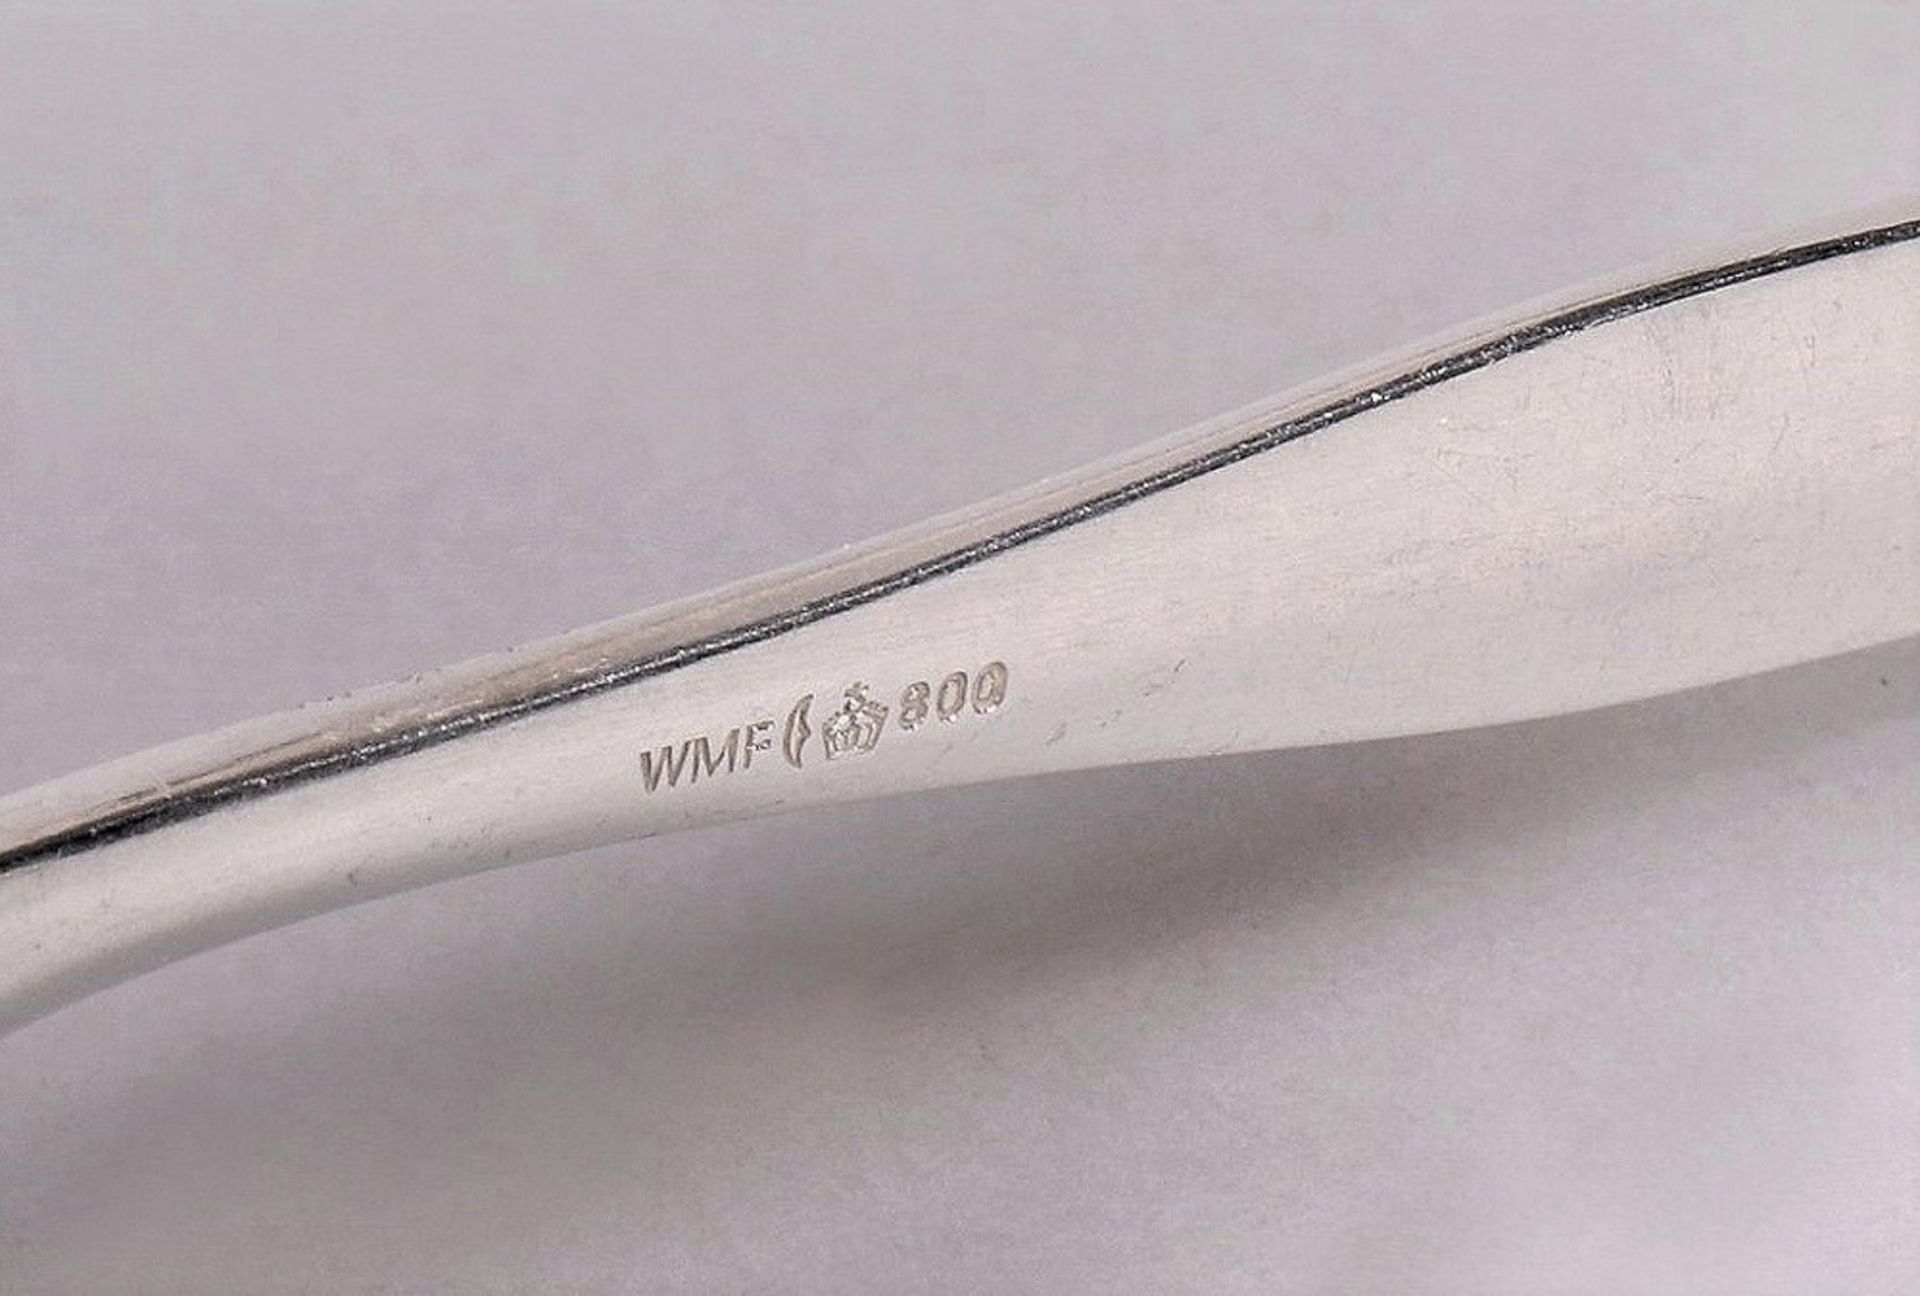 8 mocha spoons, 800 silver, design Wilhelm Wagenfeld (1950/51) for WMF, mid-20th C. - Image 4 of 4